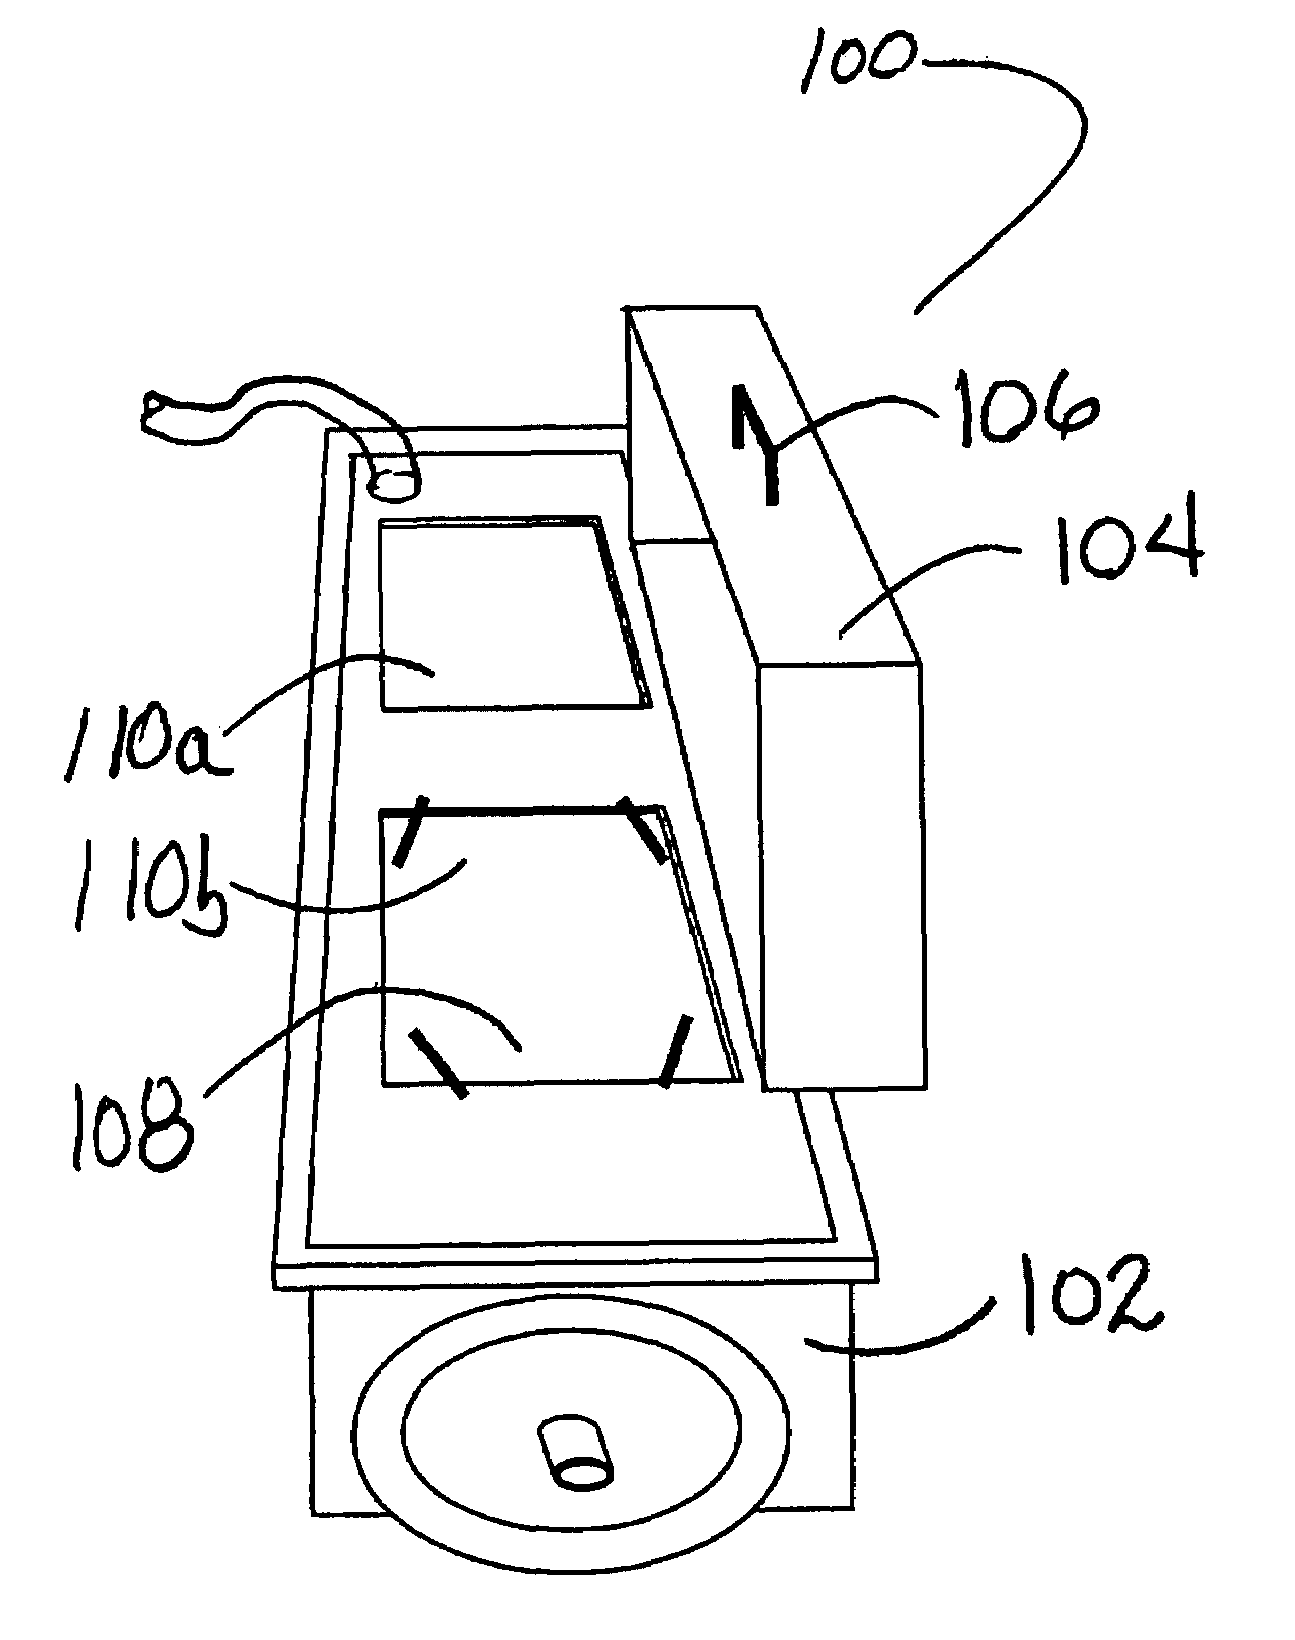 System and method for product sterilization using UV light source